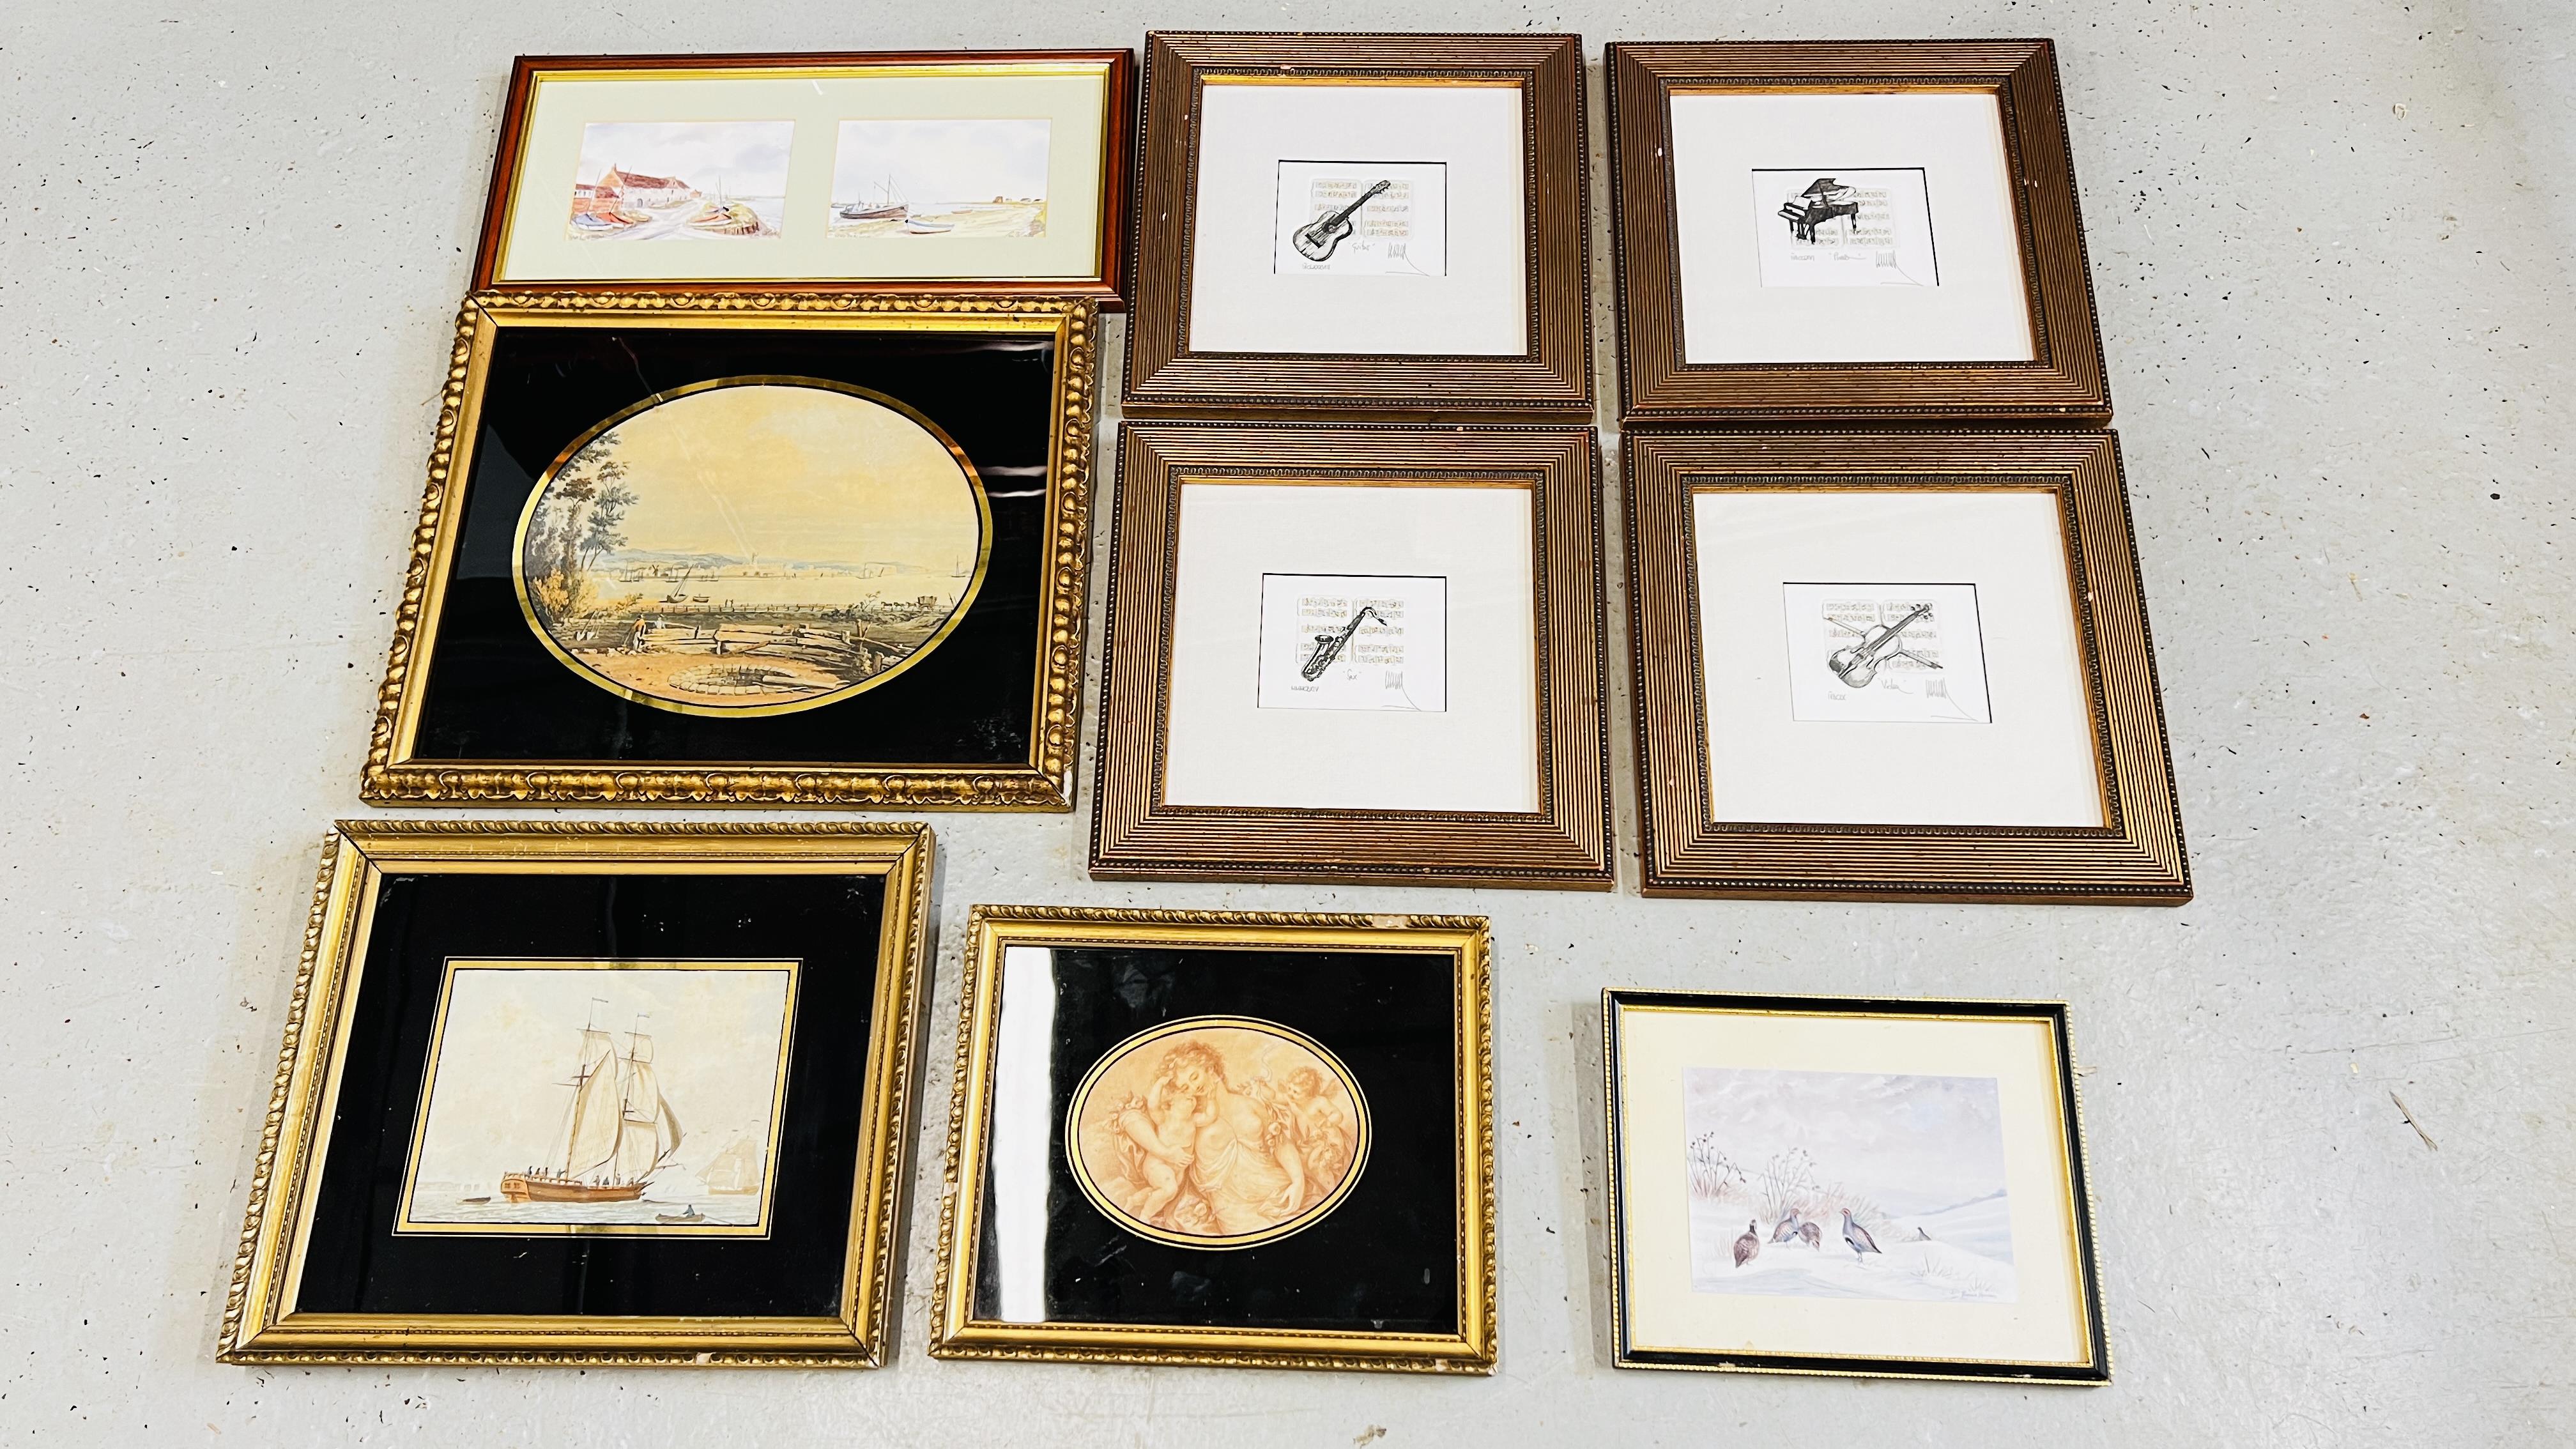 QUANTITY OF MODERN AND ANTIQUE PRINTS AND ENGRAVINGS TO INCLUDE A FRAMED SET OF 4 MUSIC RELATED